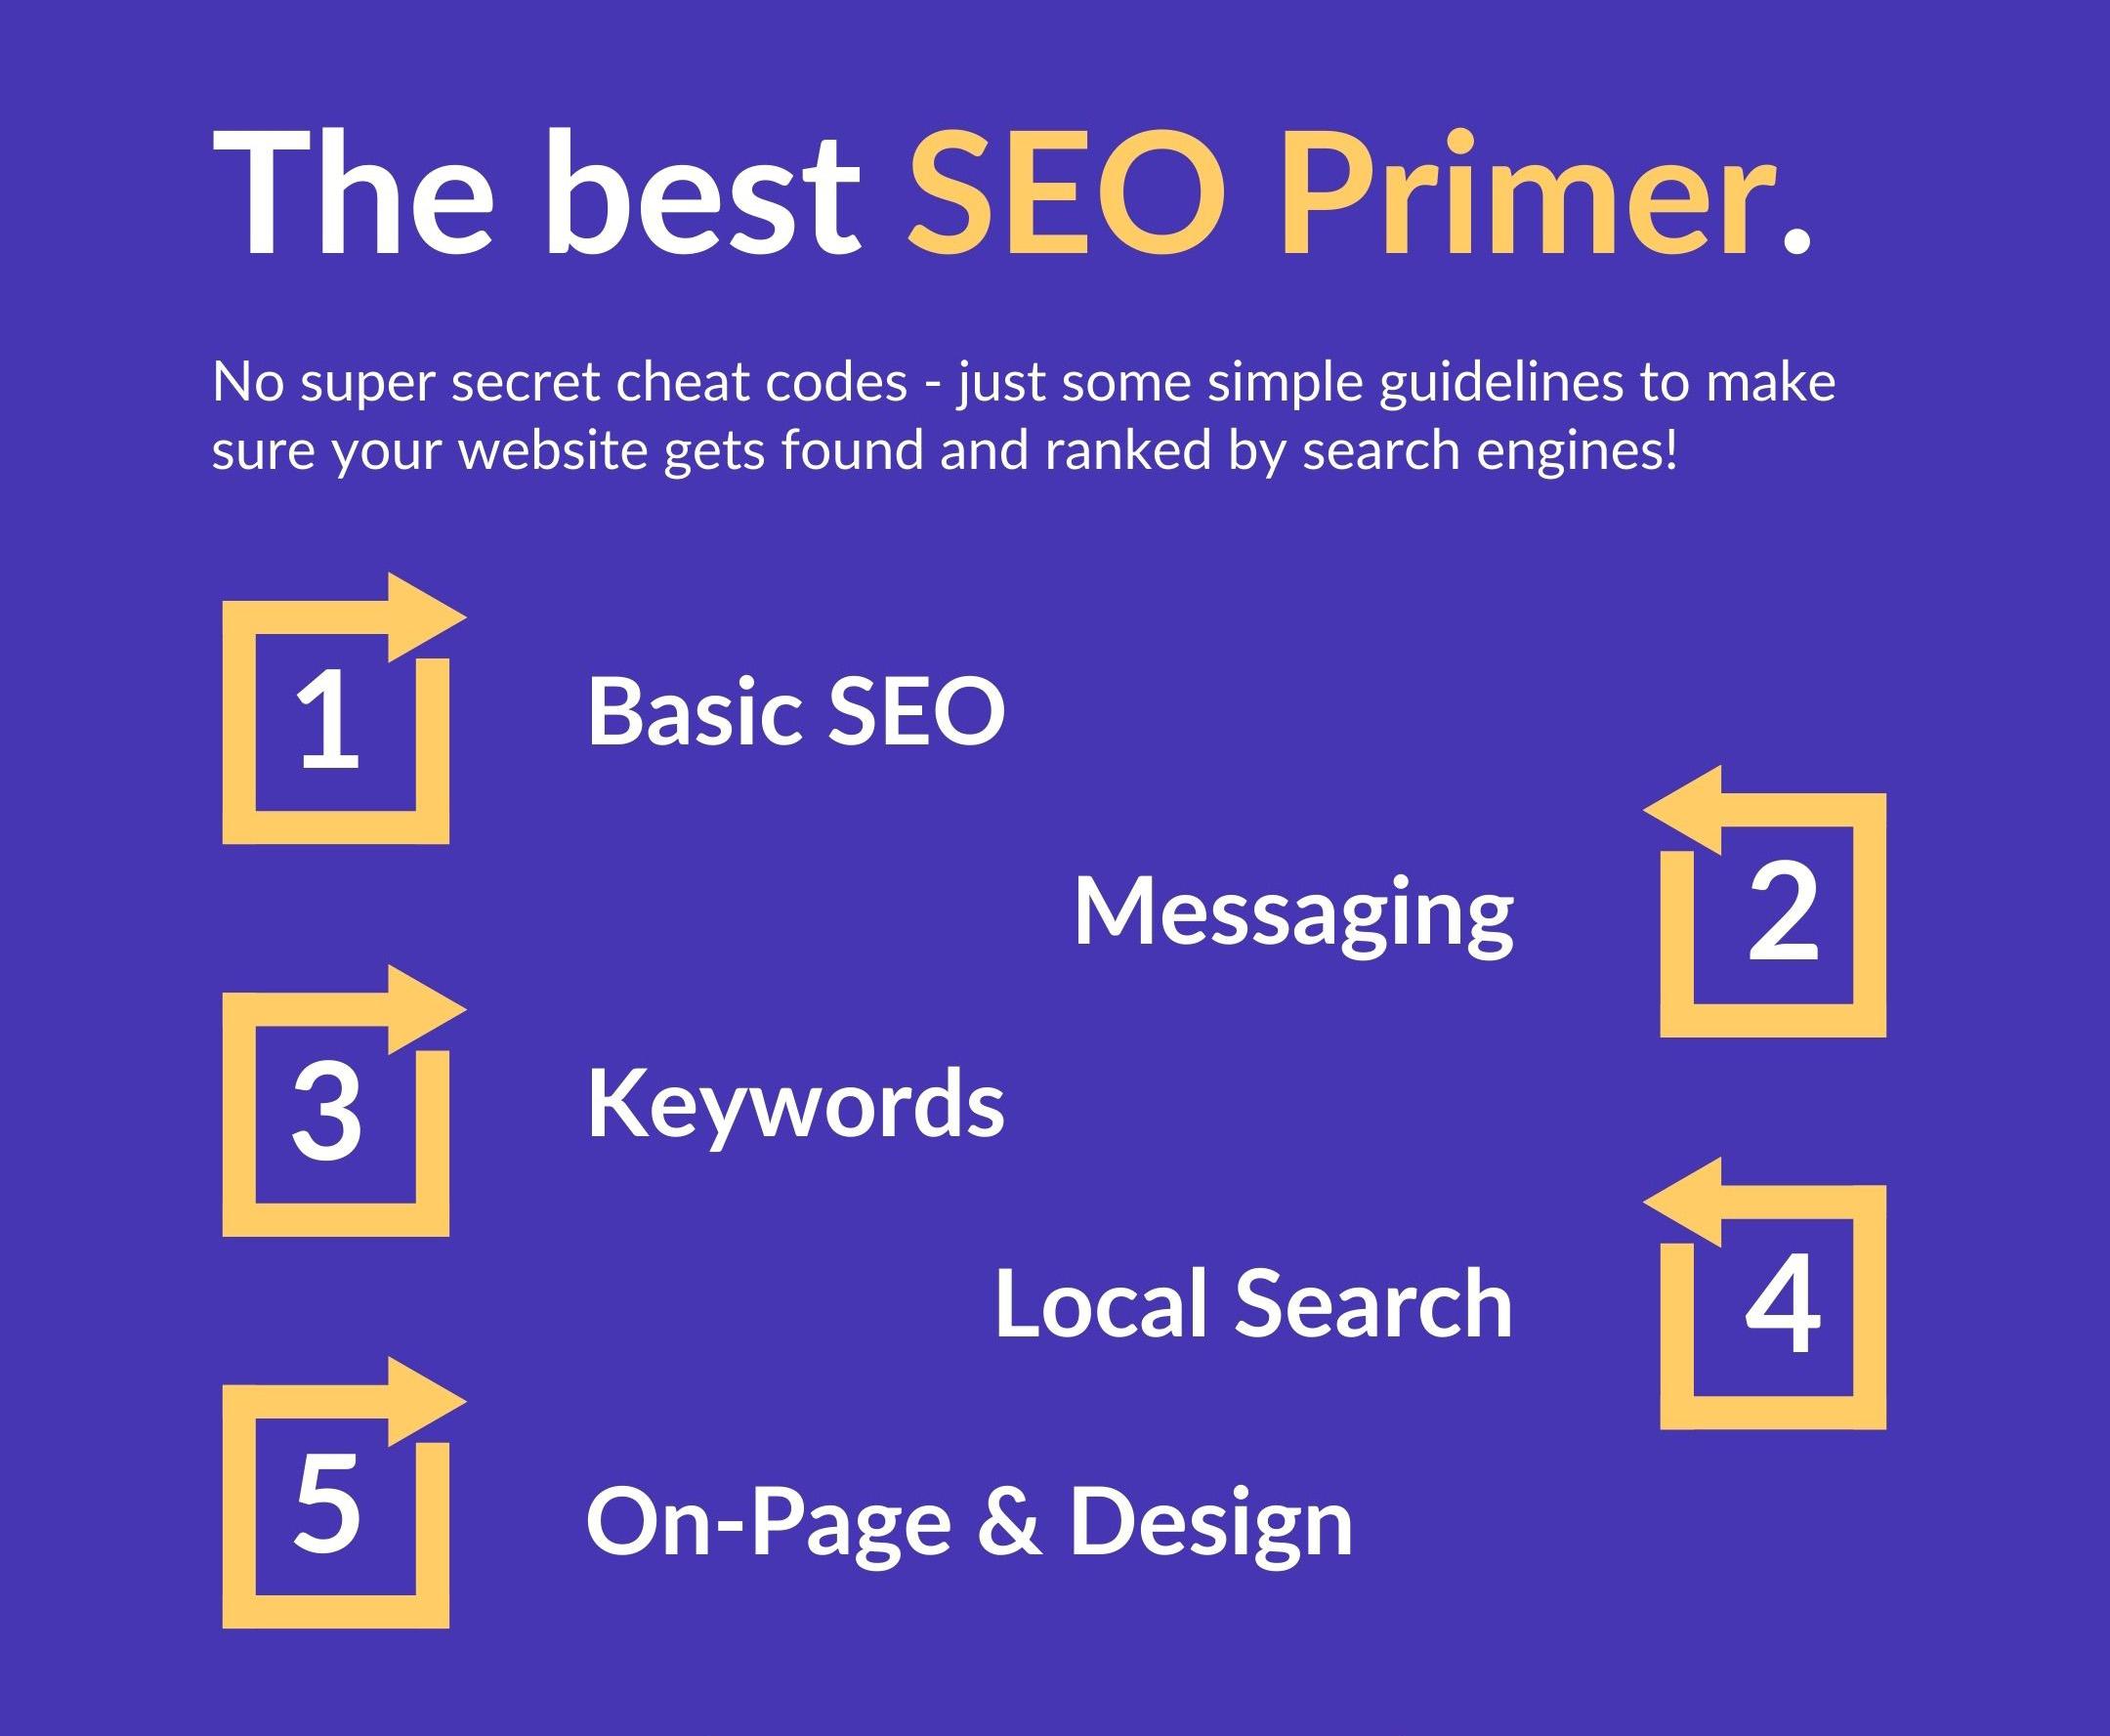 The best SEO Primer: 1. Basic SEO, 2. Messaging, 3. Keywords, 4. Local Search, 5. On-page & Design - Read the Blog